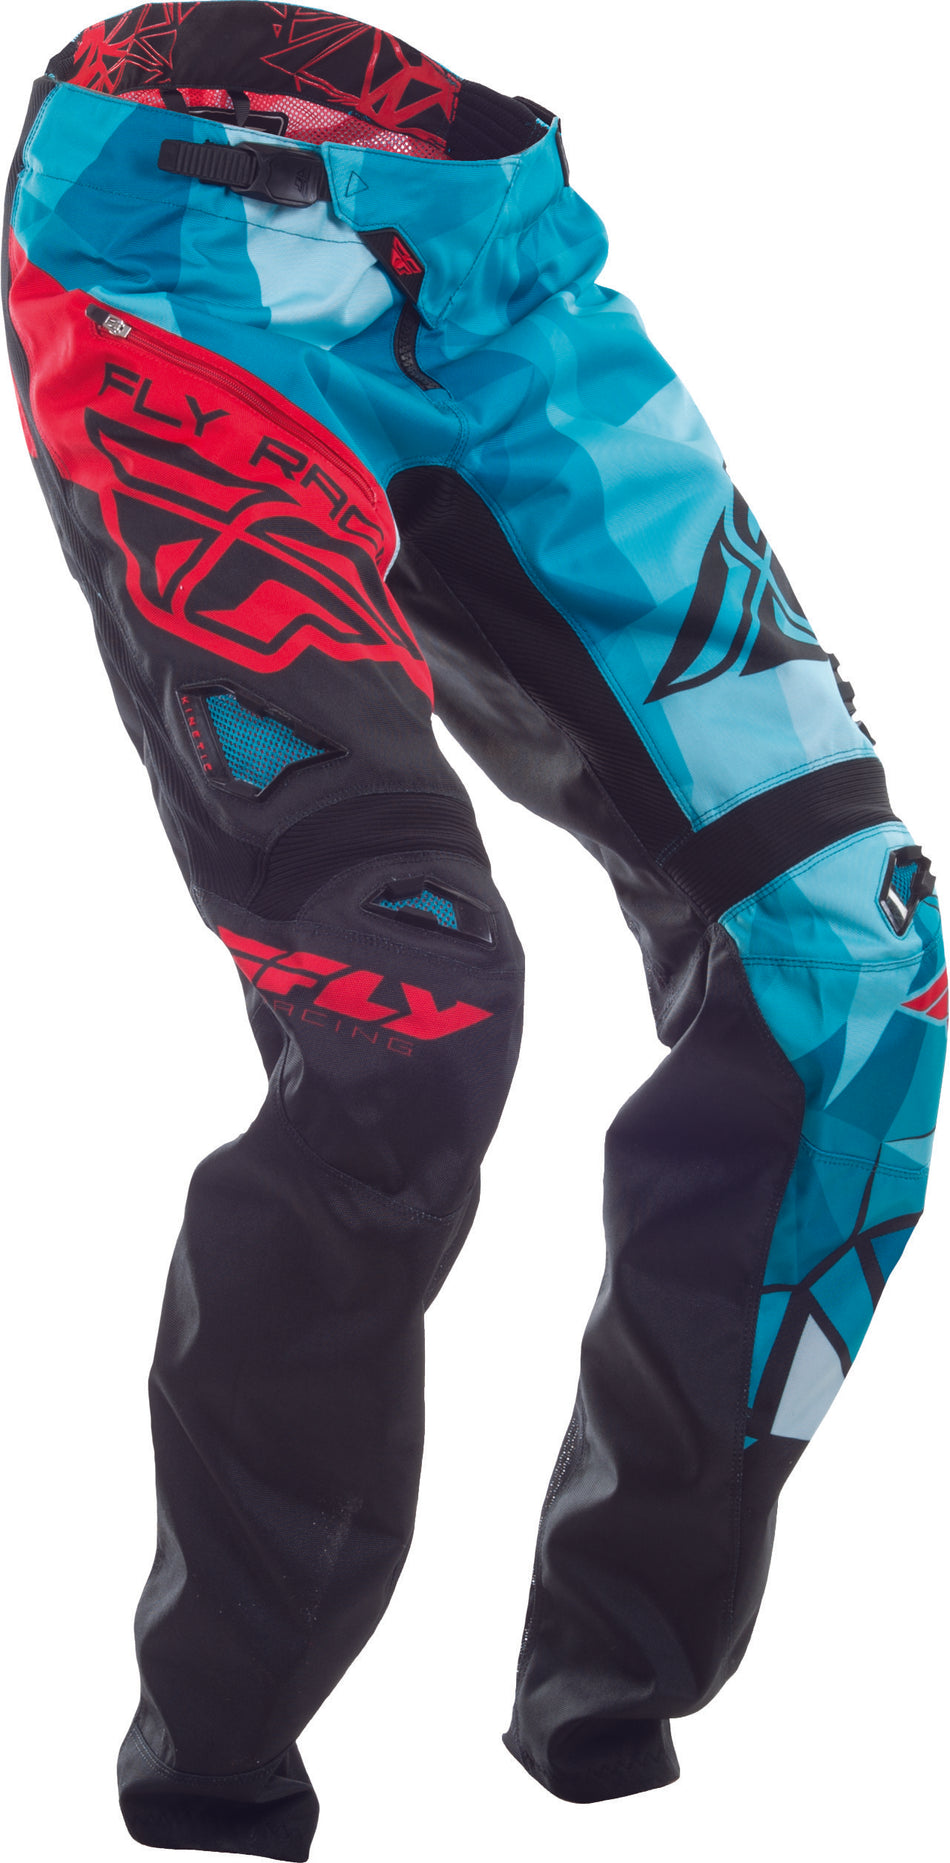 FLY RACING Bicycle Crux Pant Black/Teal/Red Sz 30 370-02930